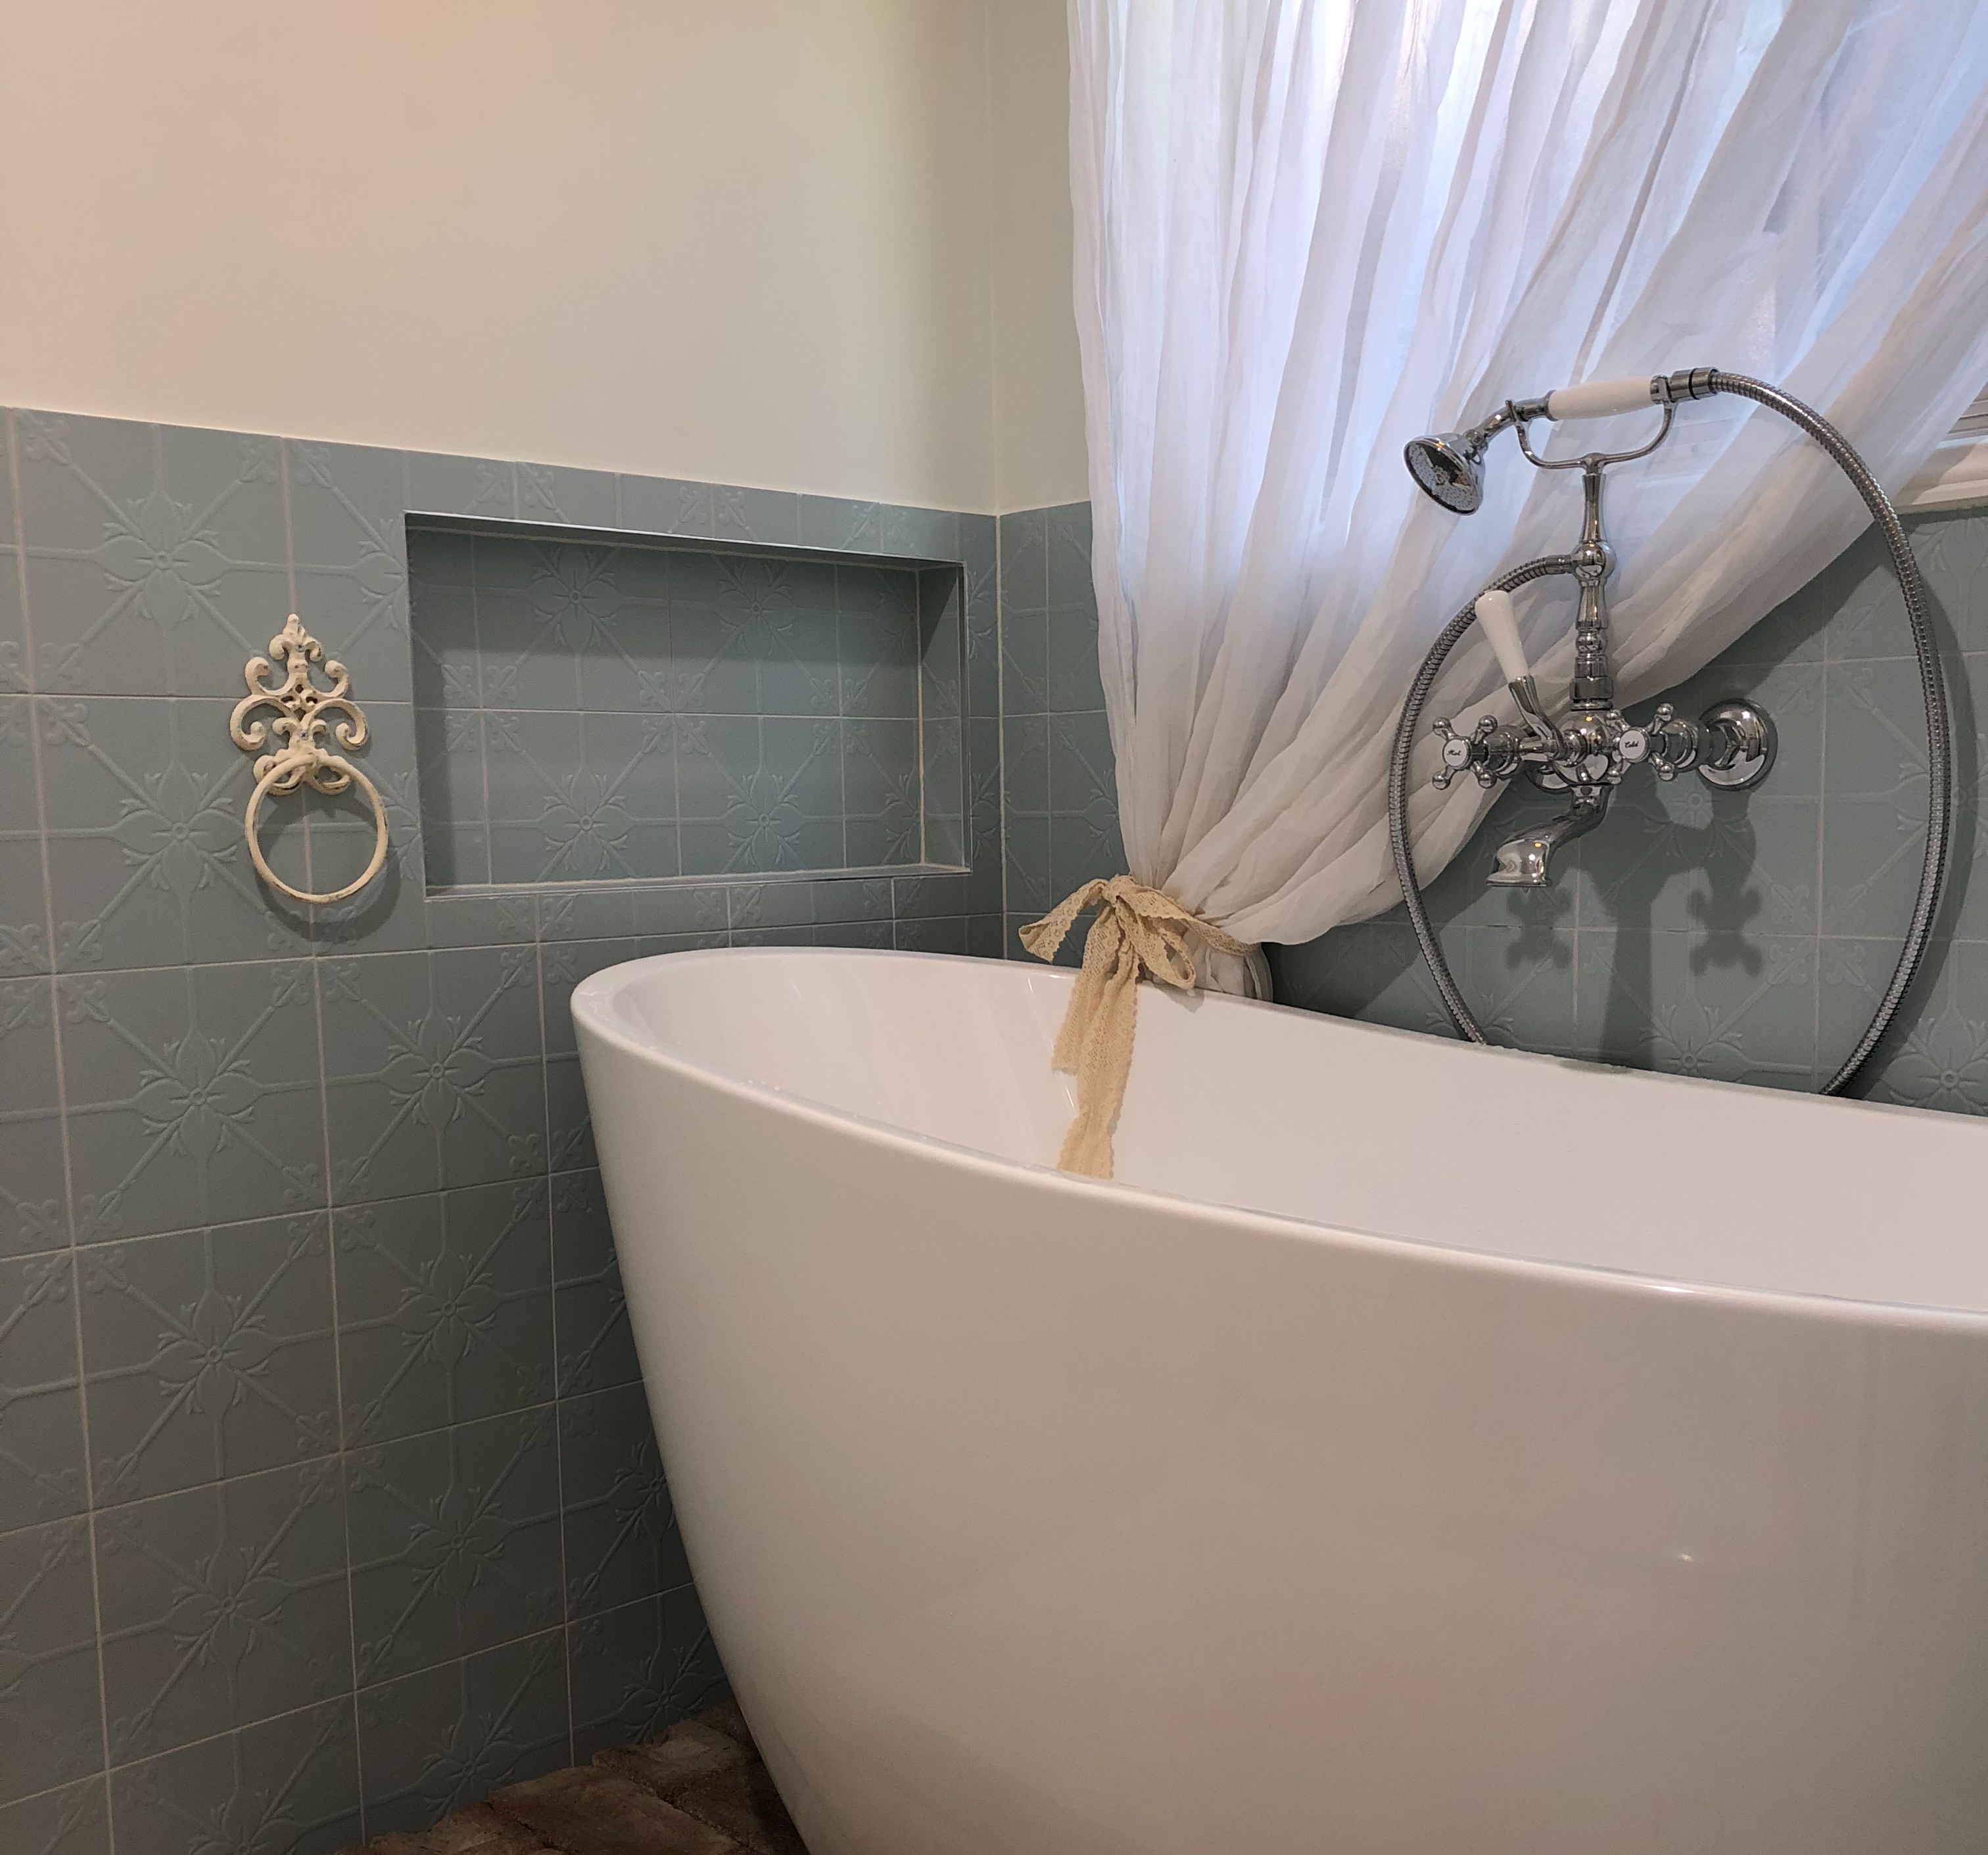 Modern free standing bath with antique tap fittings and built-in niche